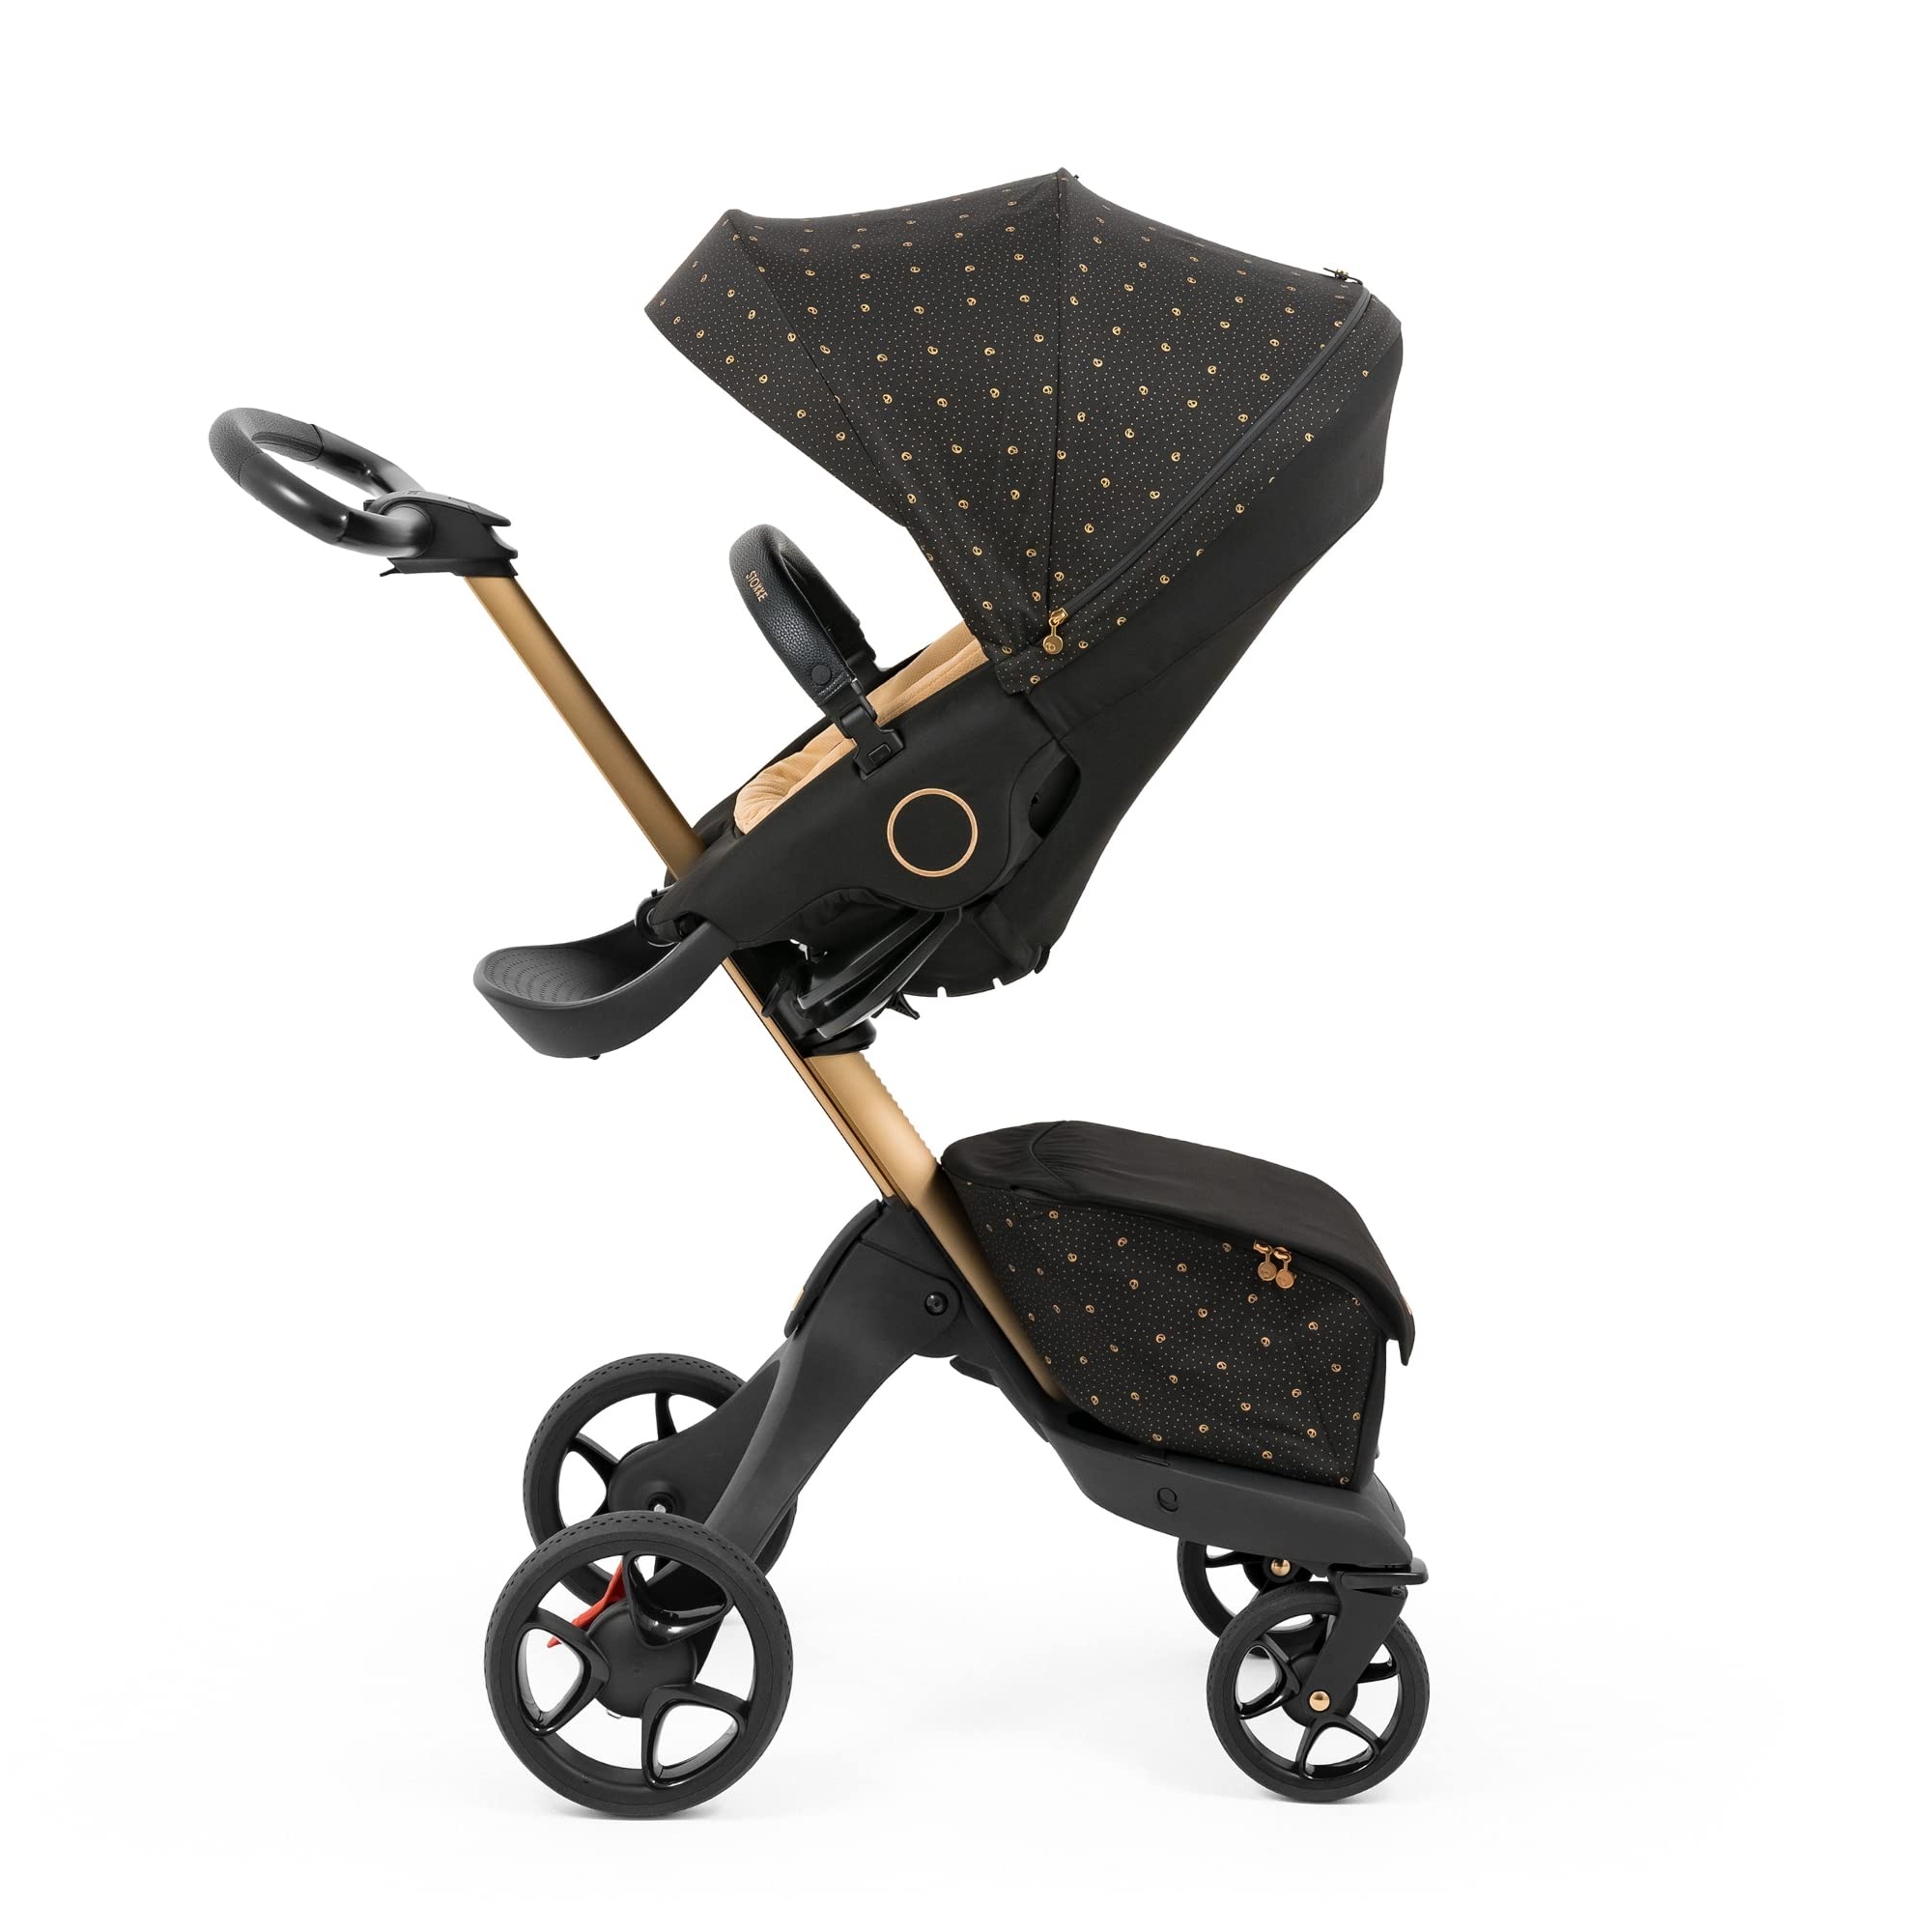 Stokke Xplory X, Signature - Luxury Stroller - Adjustable for Both Baby & Parents’ Comfort - Padding & Harness for Added Safety - Folds in One Step